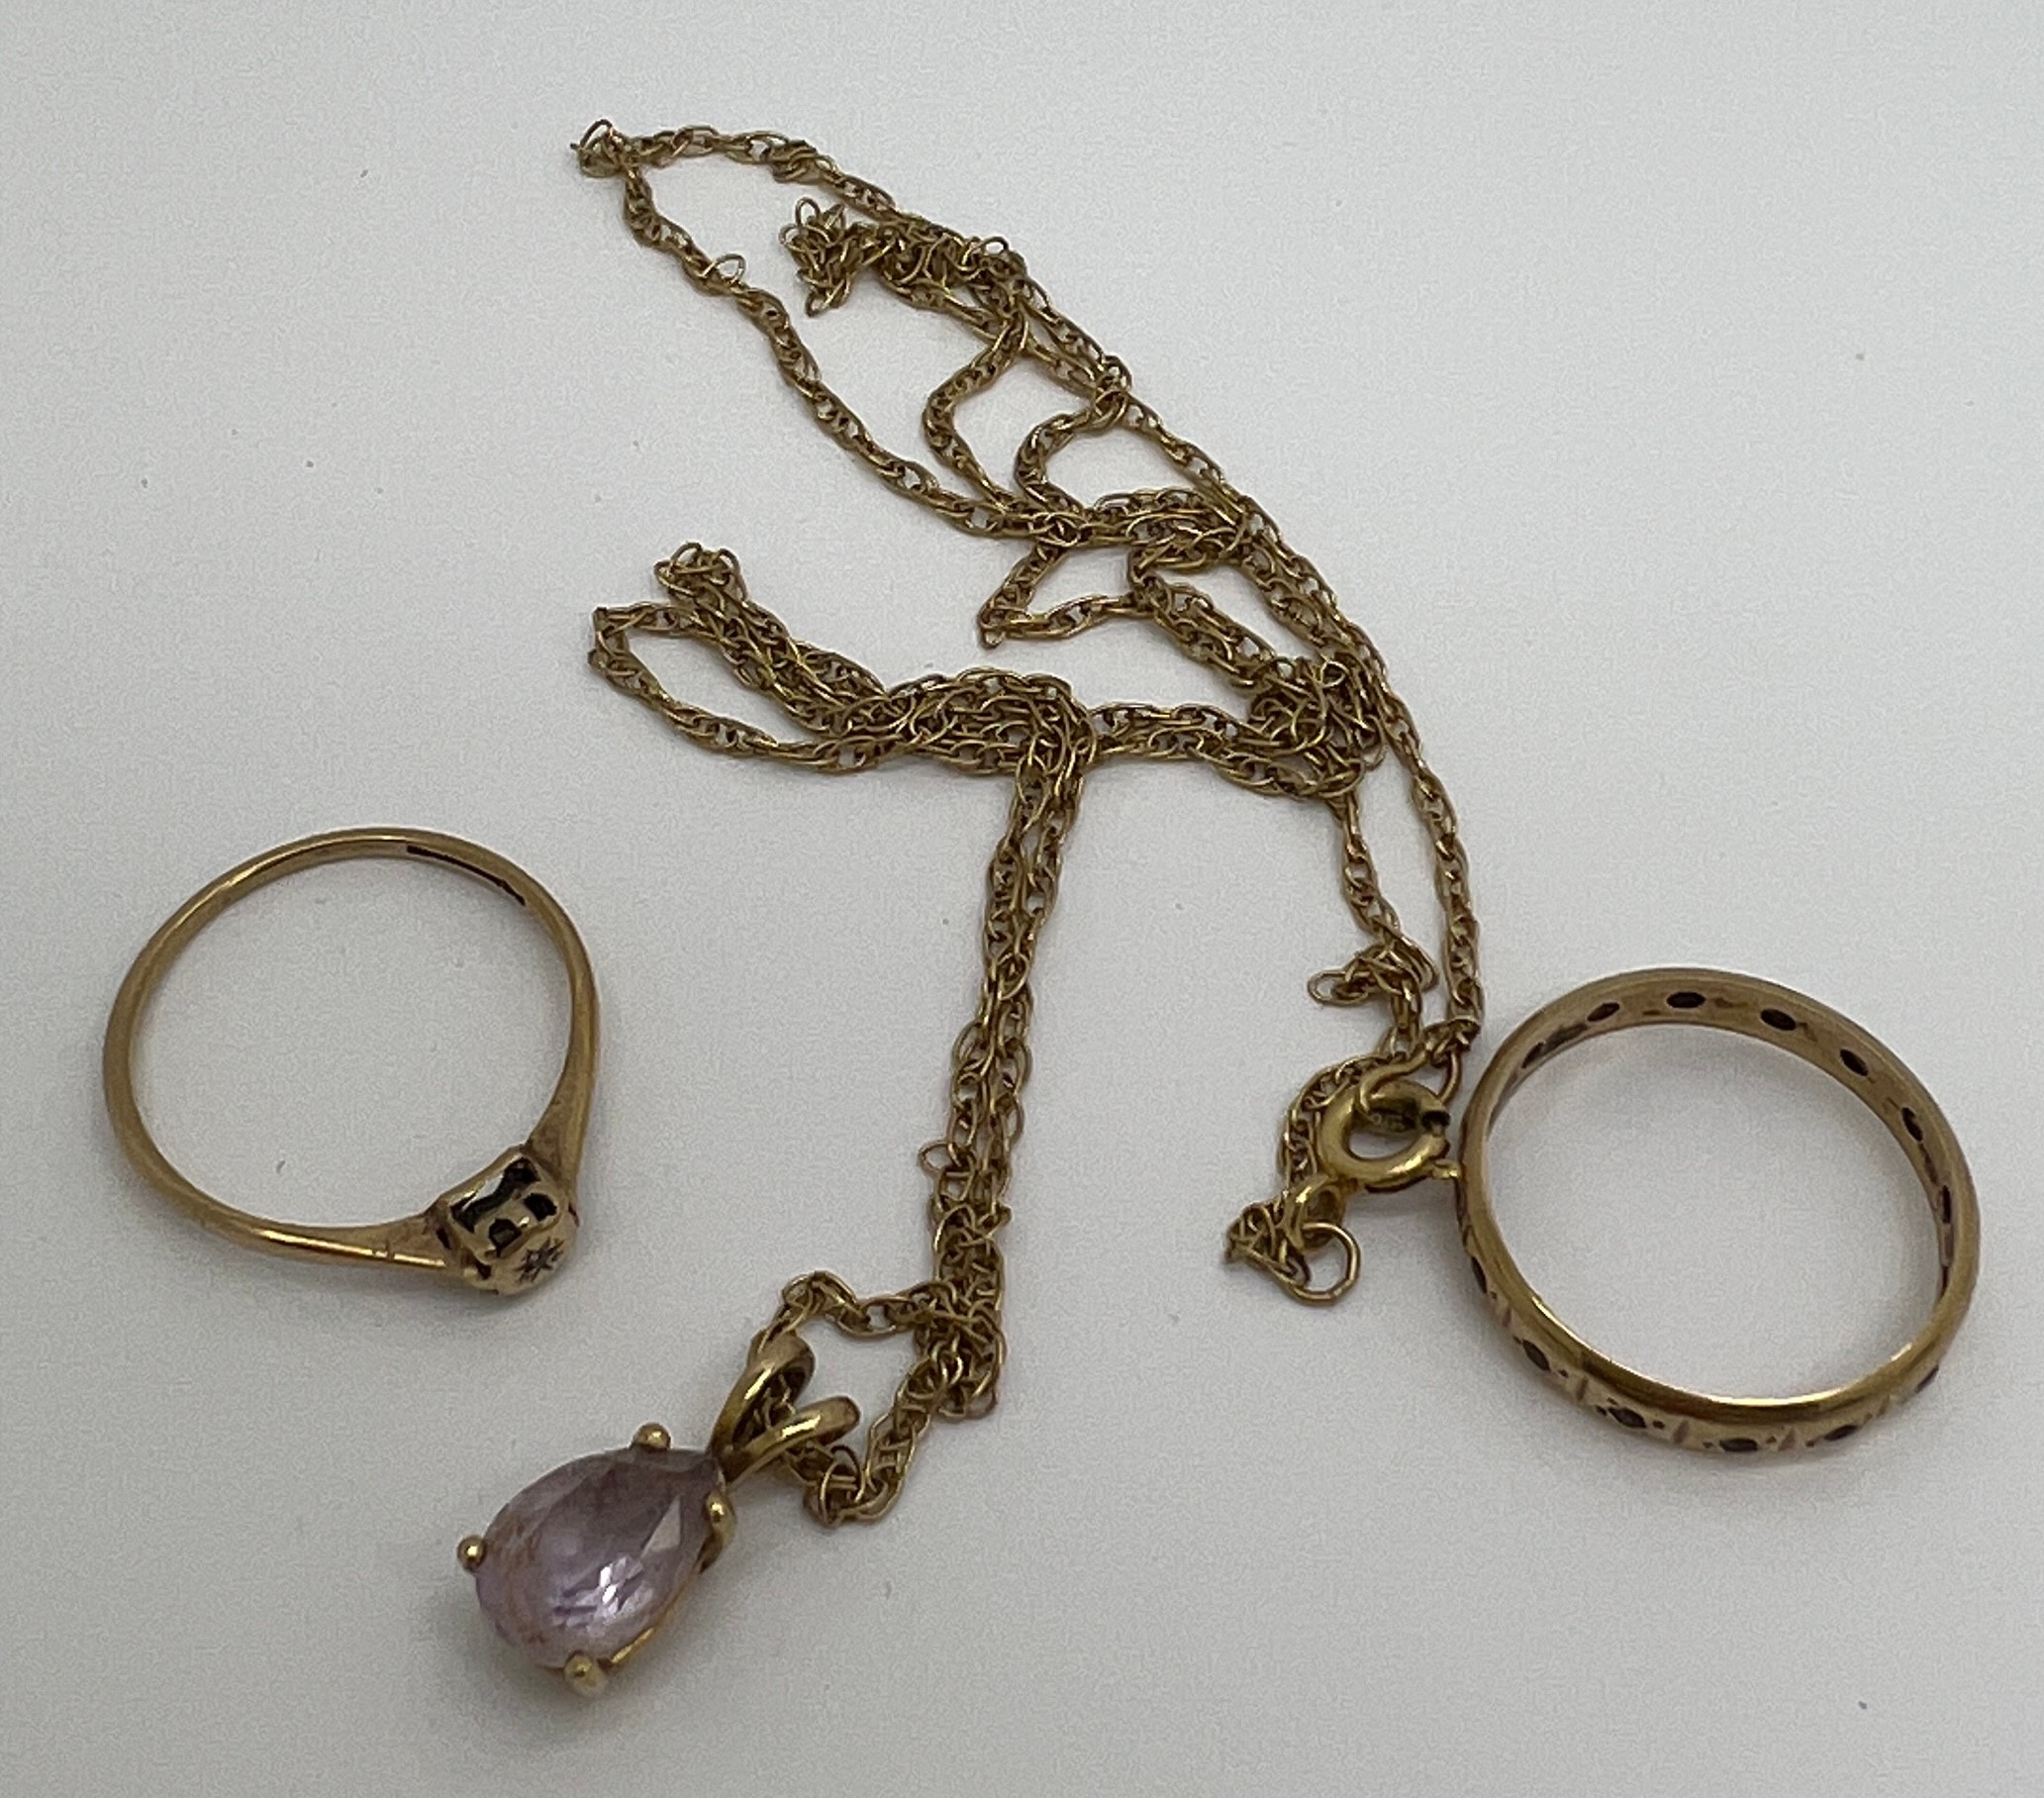 Two 9 carat gold rings and a 9 carat gold chain with unmarked pendant. Total weight 5.1gm.